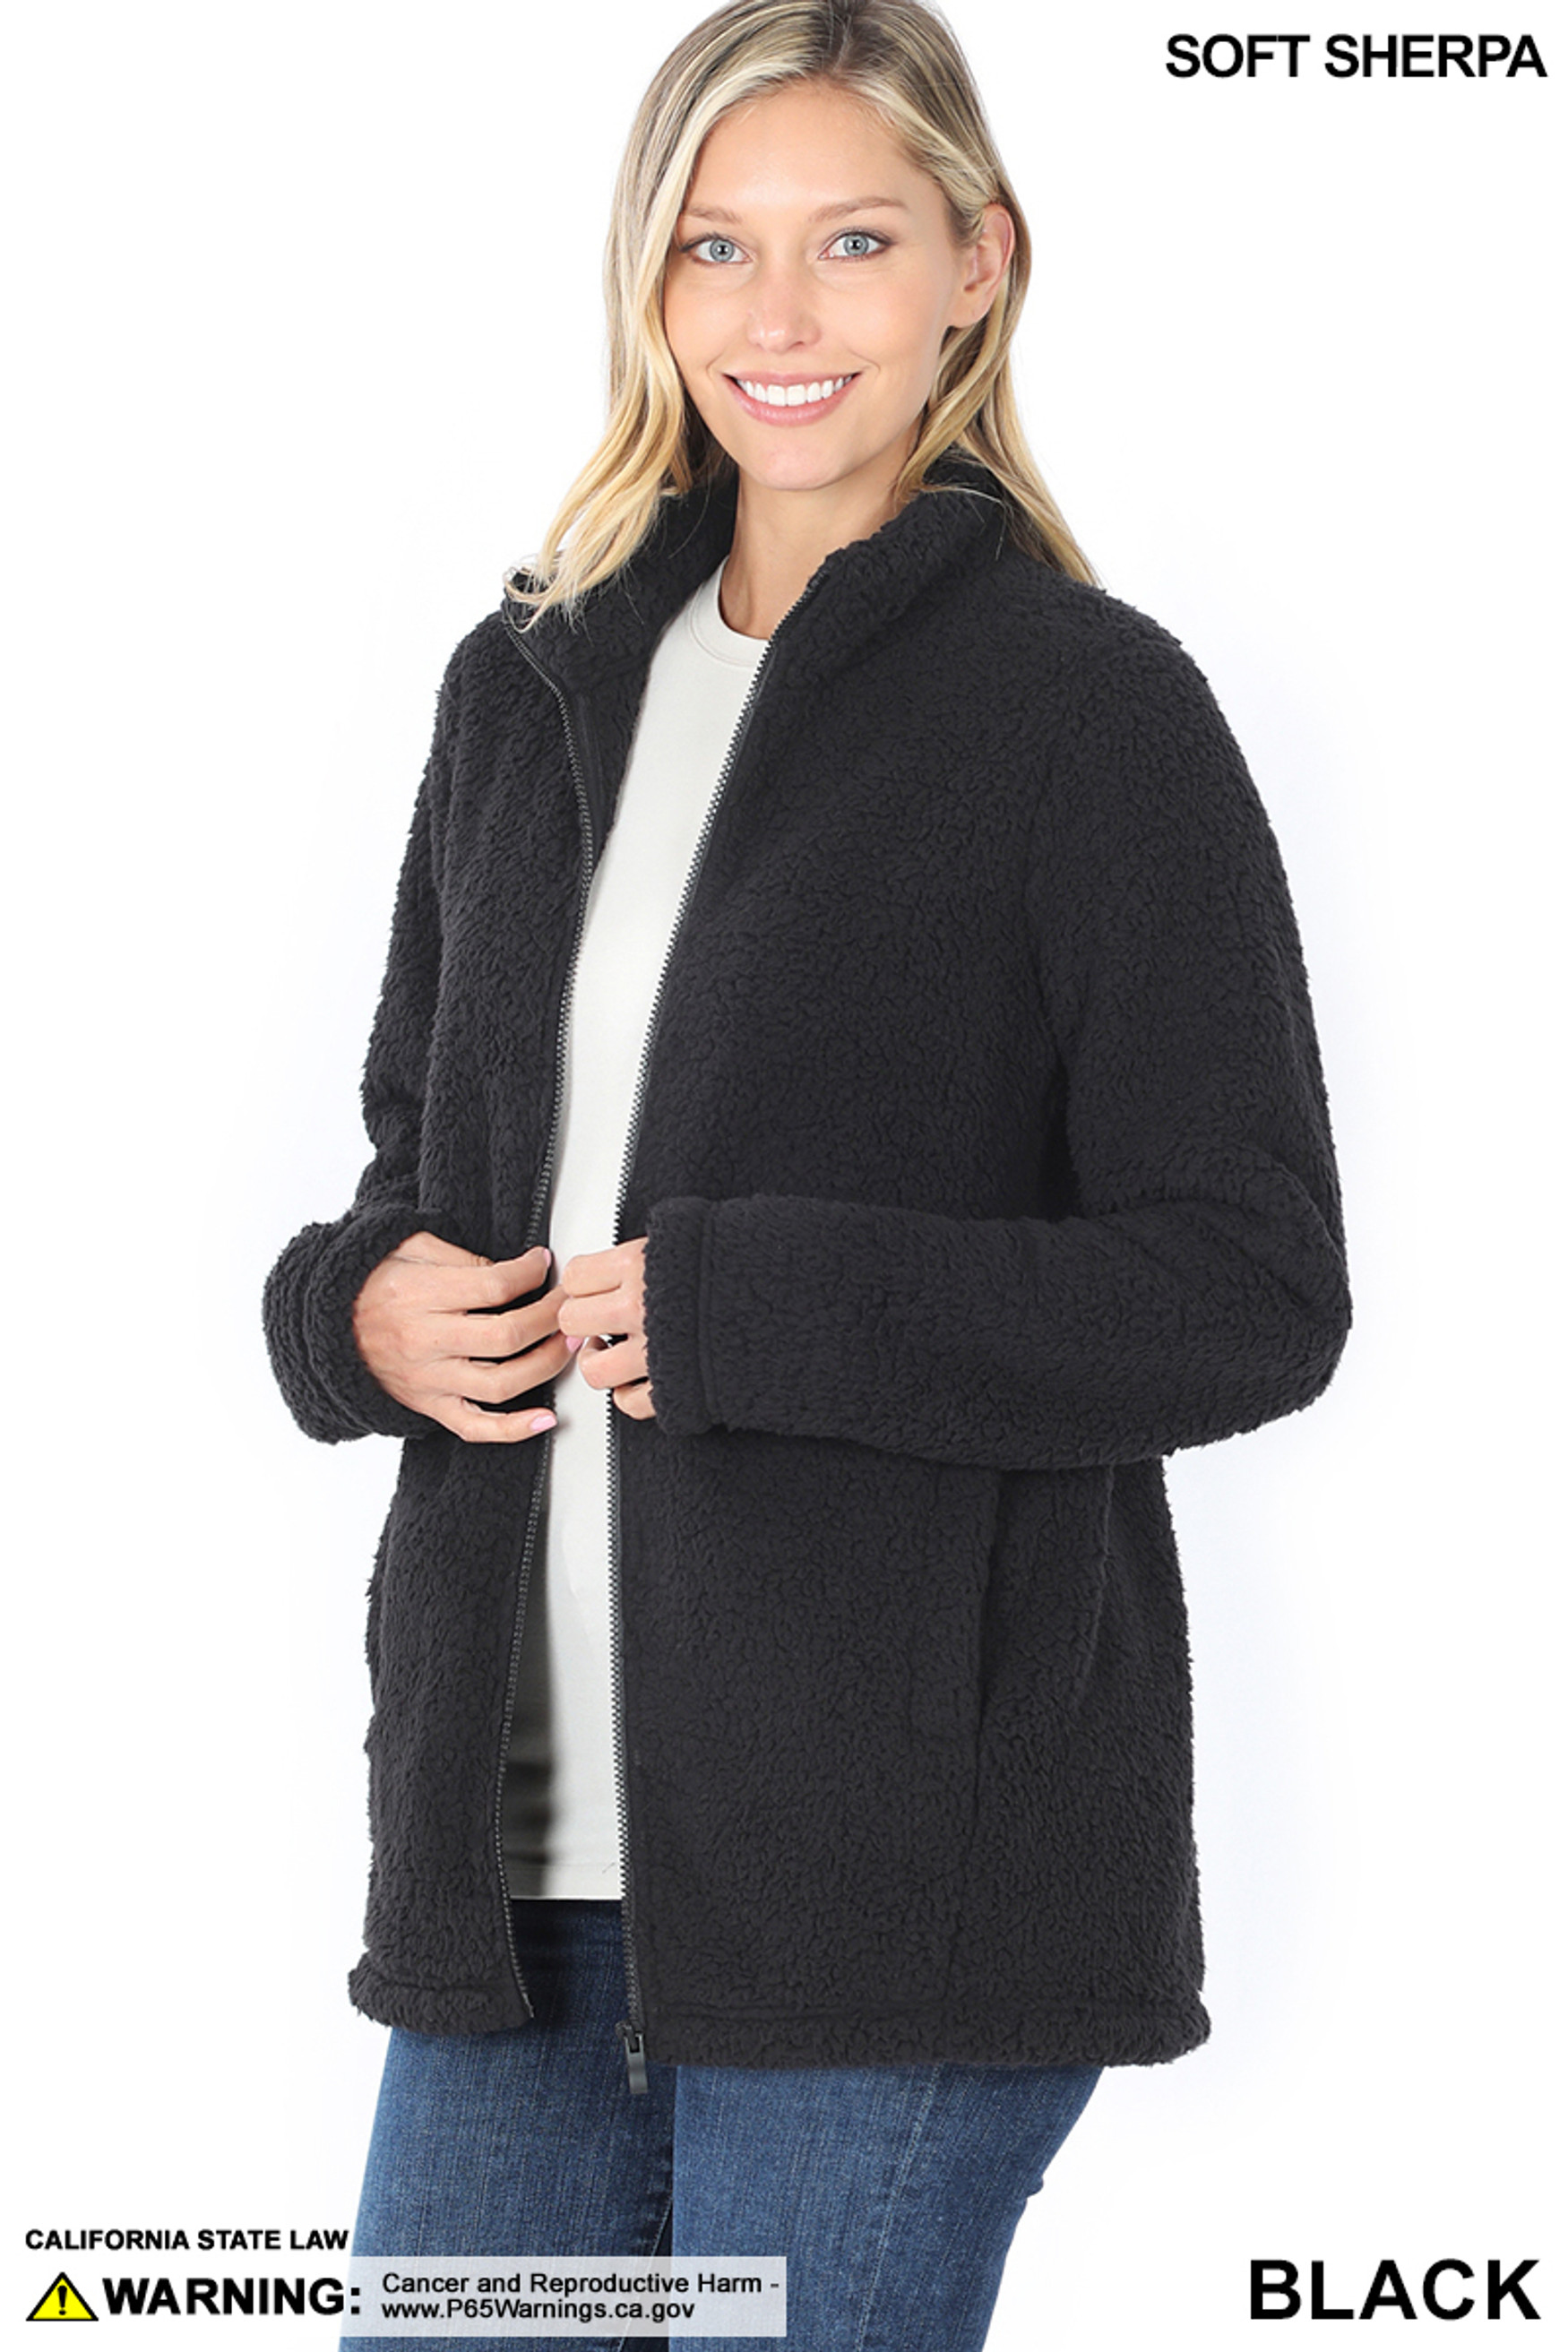 45 degree Unzipped image of Black Sherpa Zip Up Jacket with Side Pockets